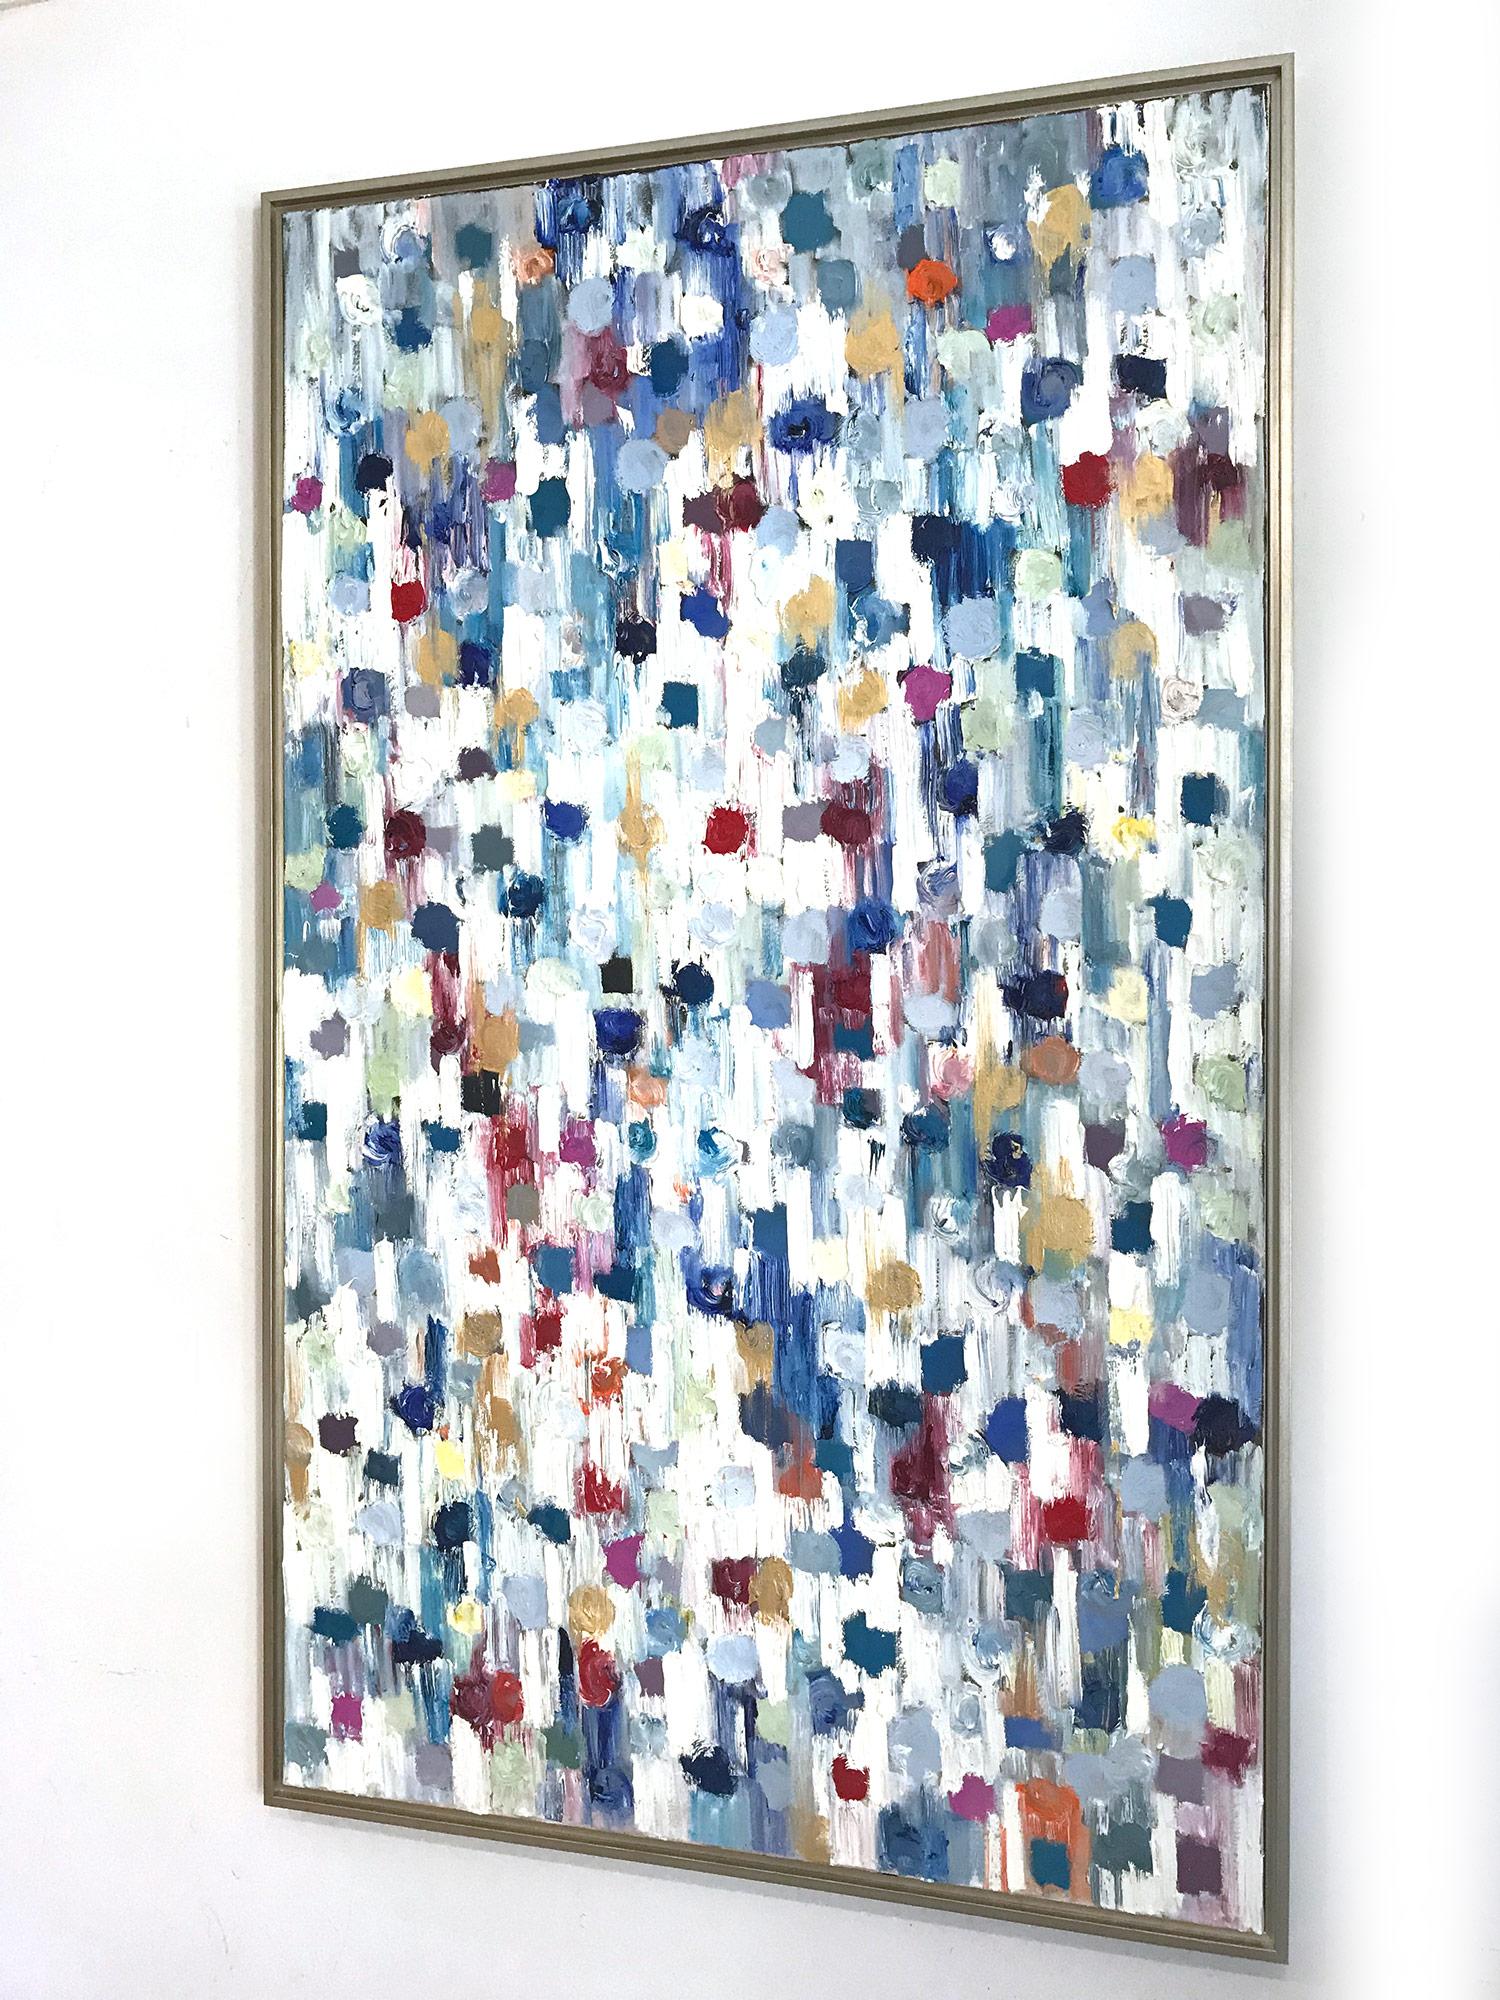 Dripping Dots - The Citadel, Colorful, Abstract, Oil Painting 13